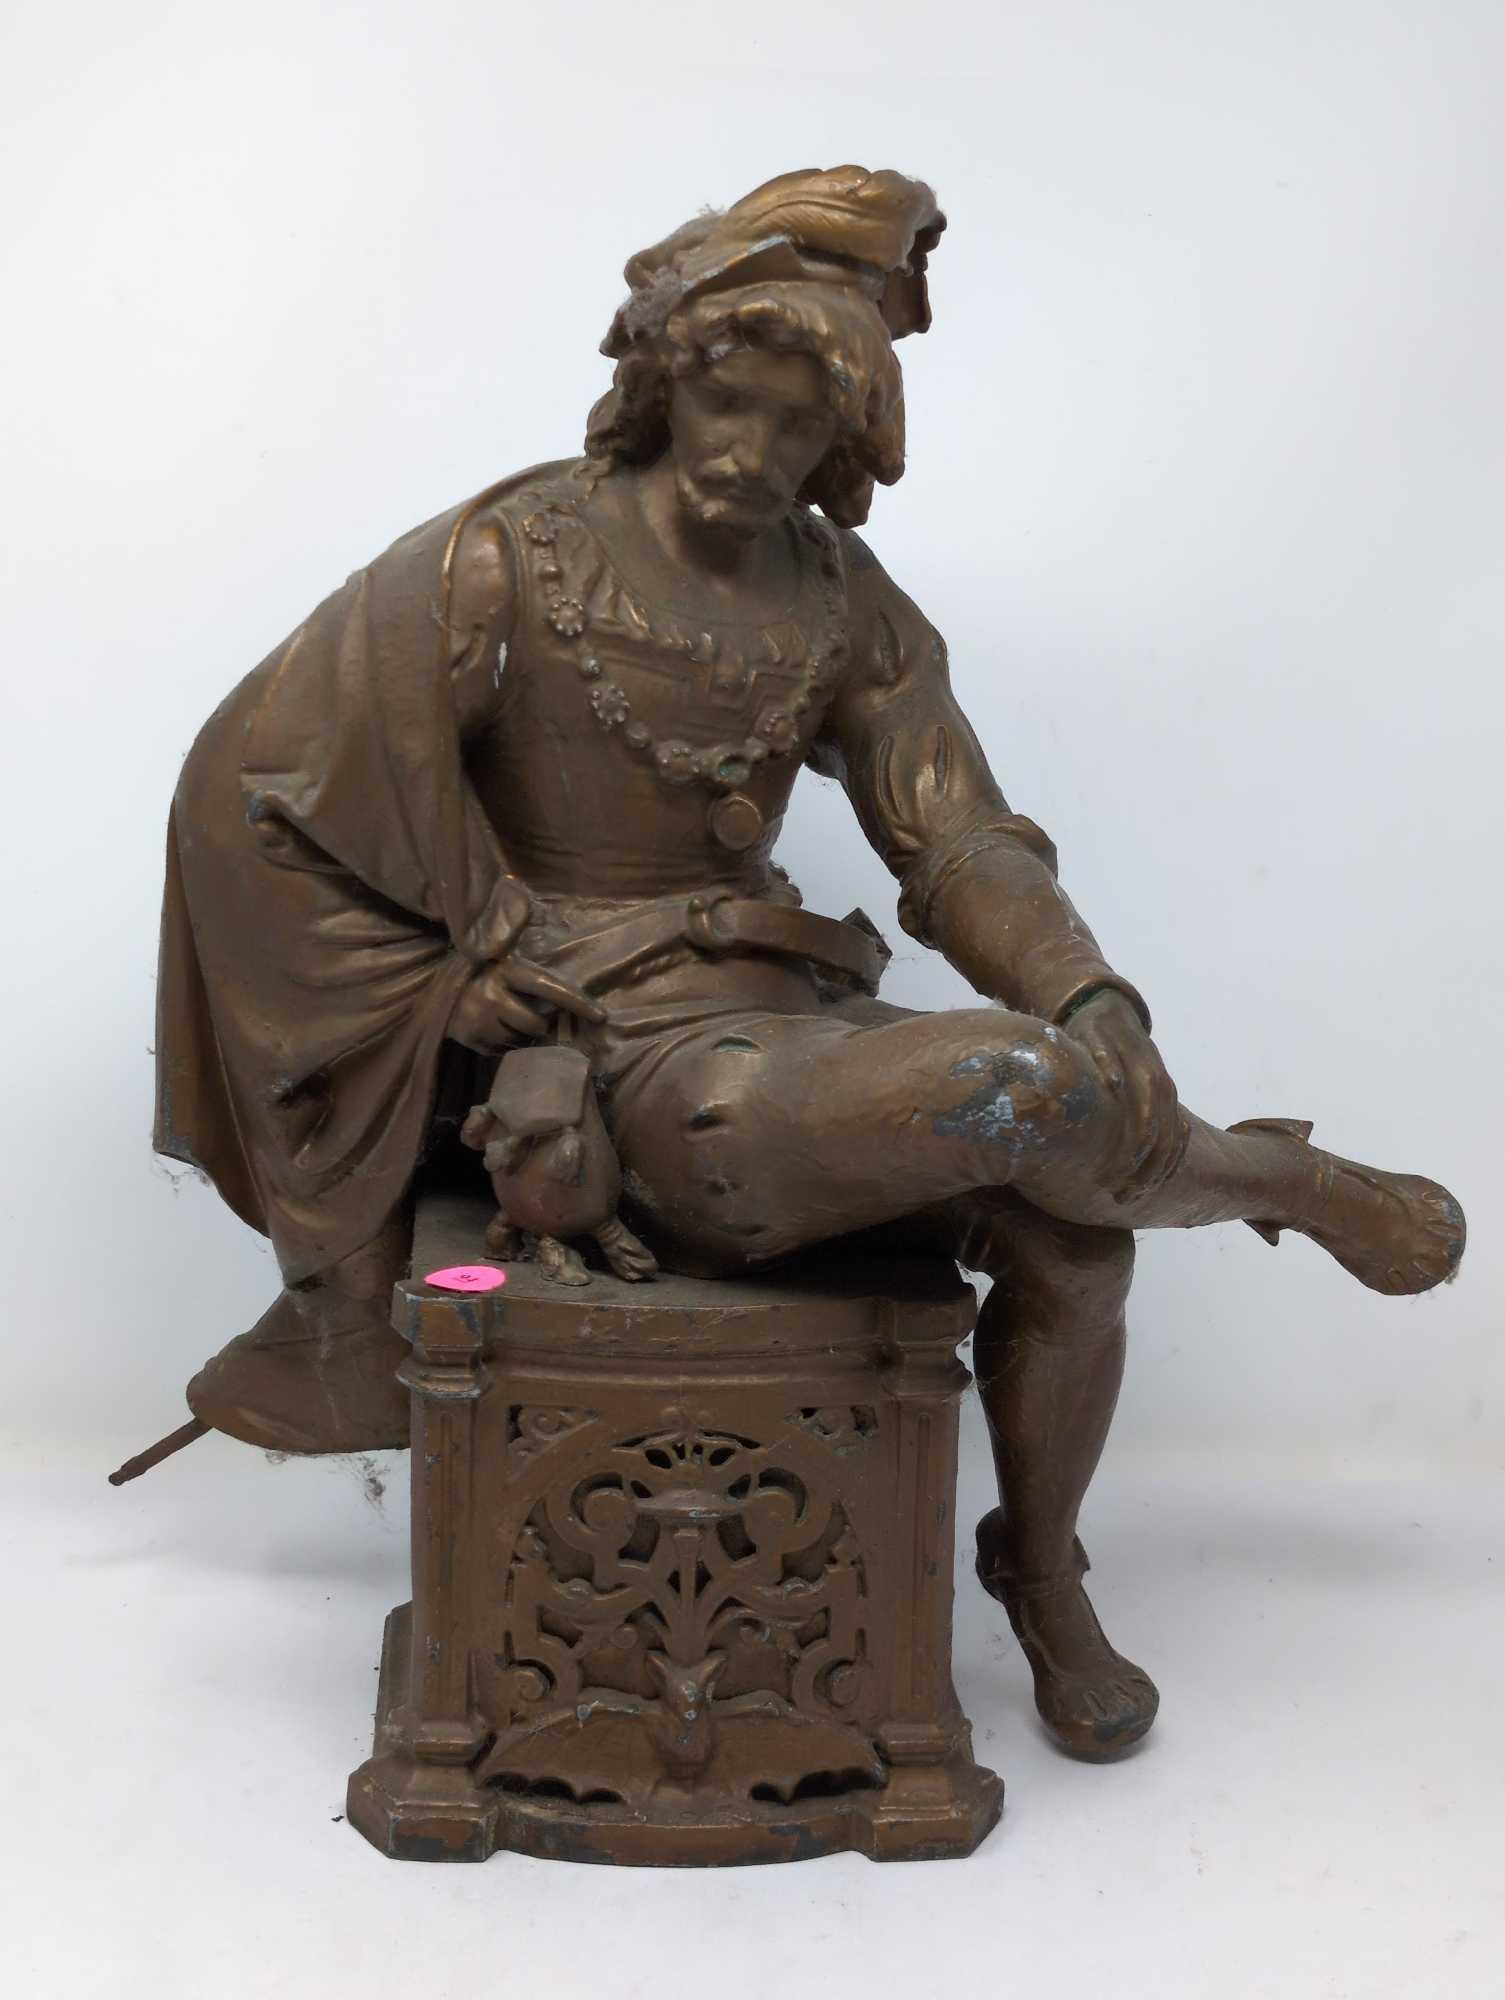 (FOYER) ANTIQUE VICTORIAN SPELTER STATUE DEPICTING AN ENGLISHMAN SITTING ON AN ORNATE BAT DETAILED